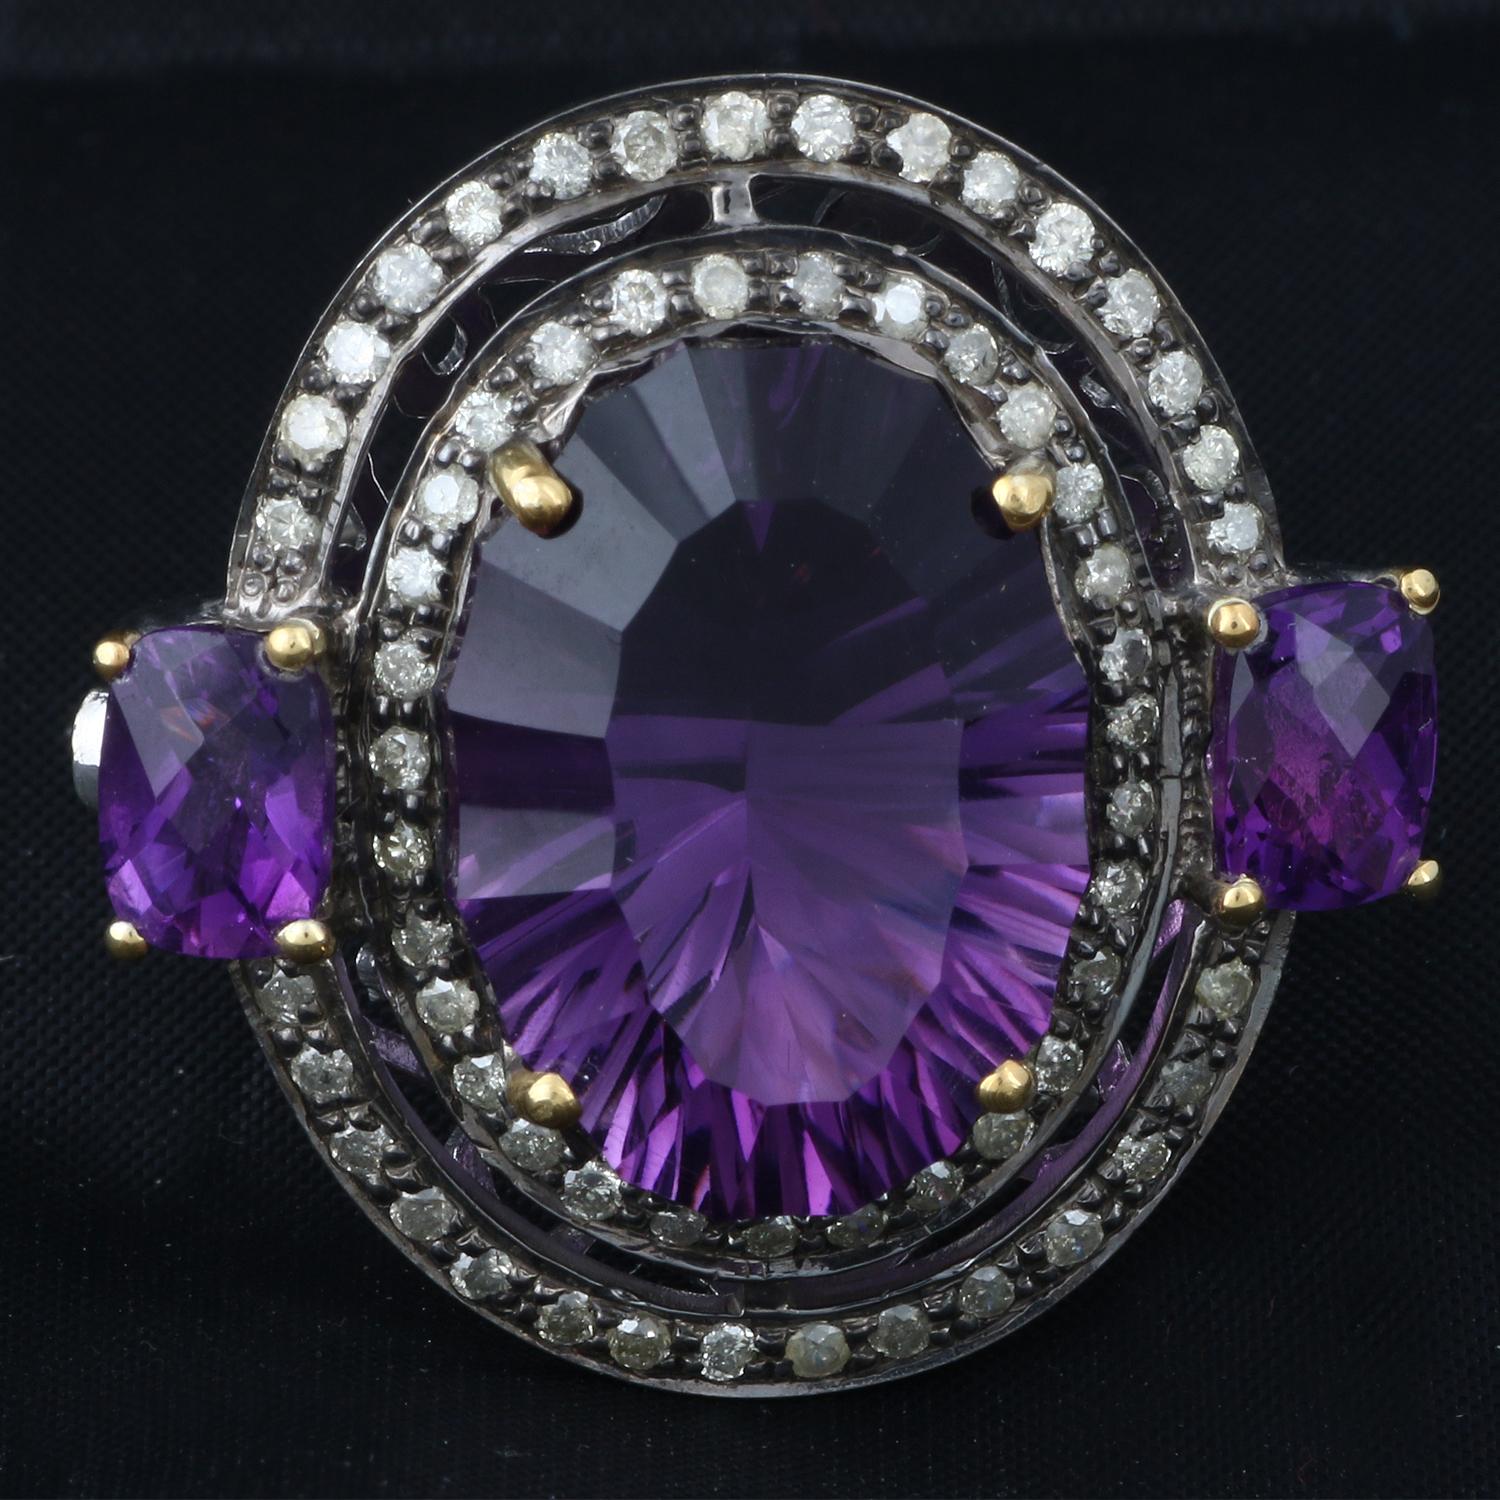 Item details:-

✦ SKU:- ESRG00152

✦ Material :- Silver
✦ Gemstone Specification:-
✧ Diamond
✧ Amethyst

✦ Approx. Diamond Weight : 0.95
✦ Approx. Silver Weight : 9.64
✦ Approx. Gross Weight : 12.80

Ring Size (US): 7.5

You will Get the same